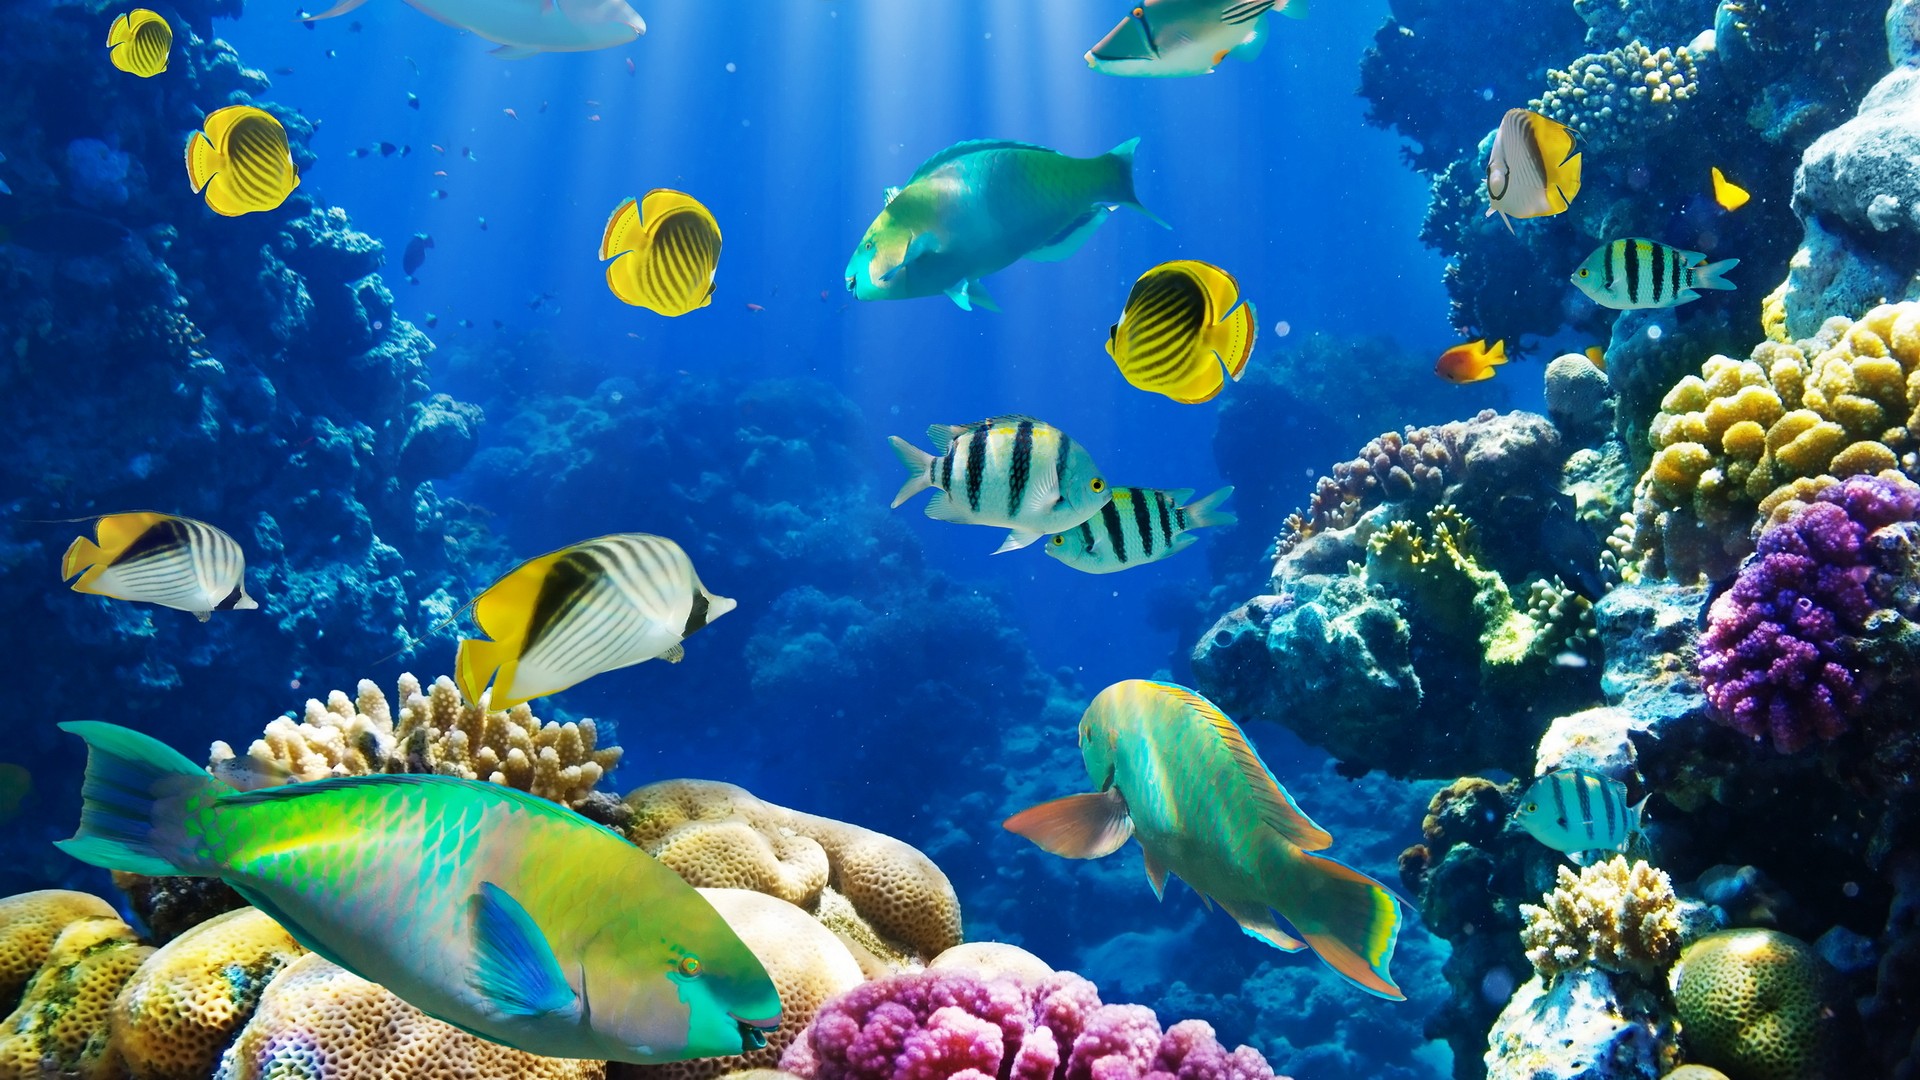 Live Fish Background HD Wallpaper Background